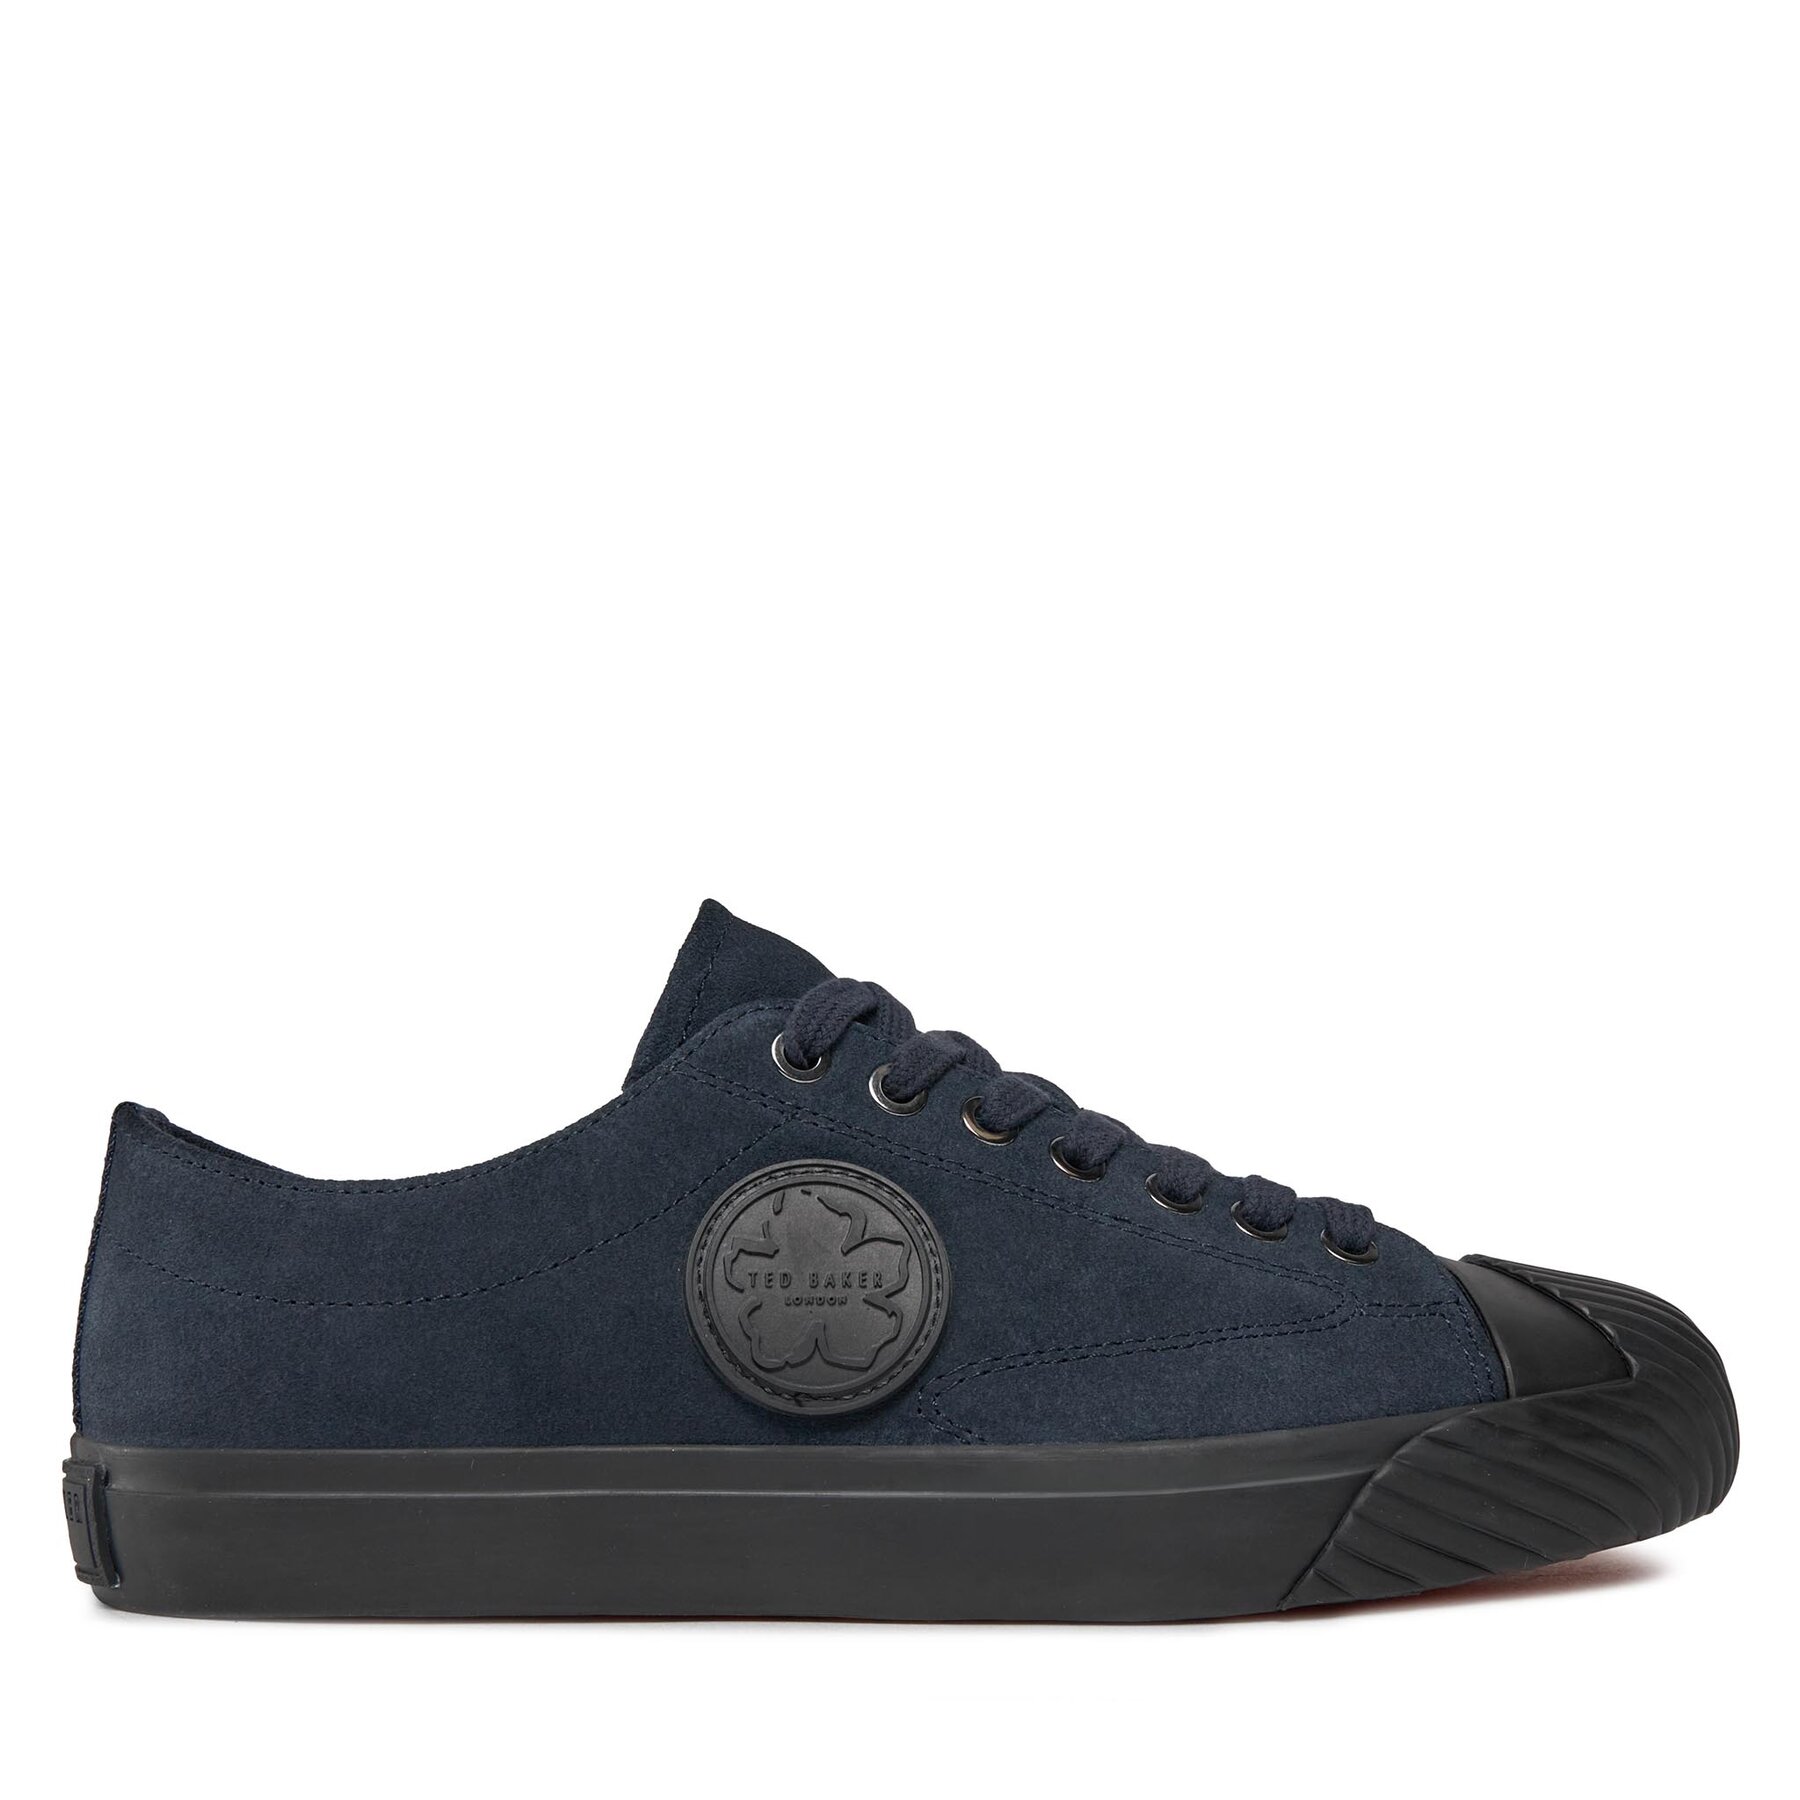 Sneakers aus Stoff Ted Baker 254299 Navy von Ted Baker